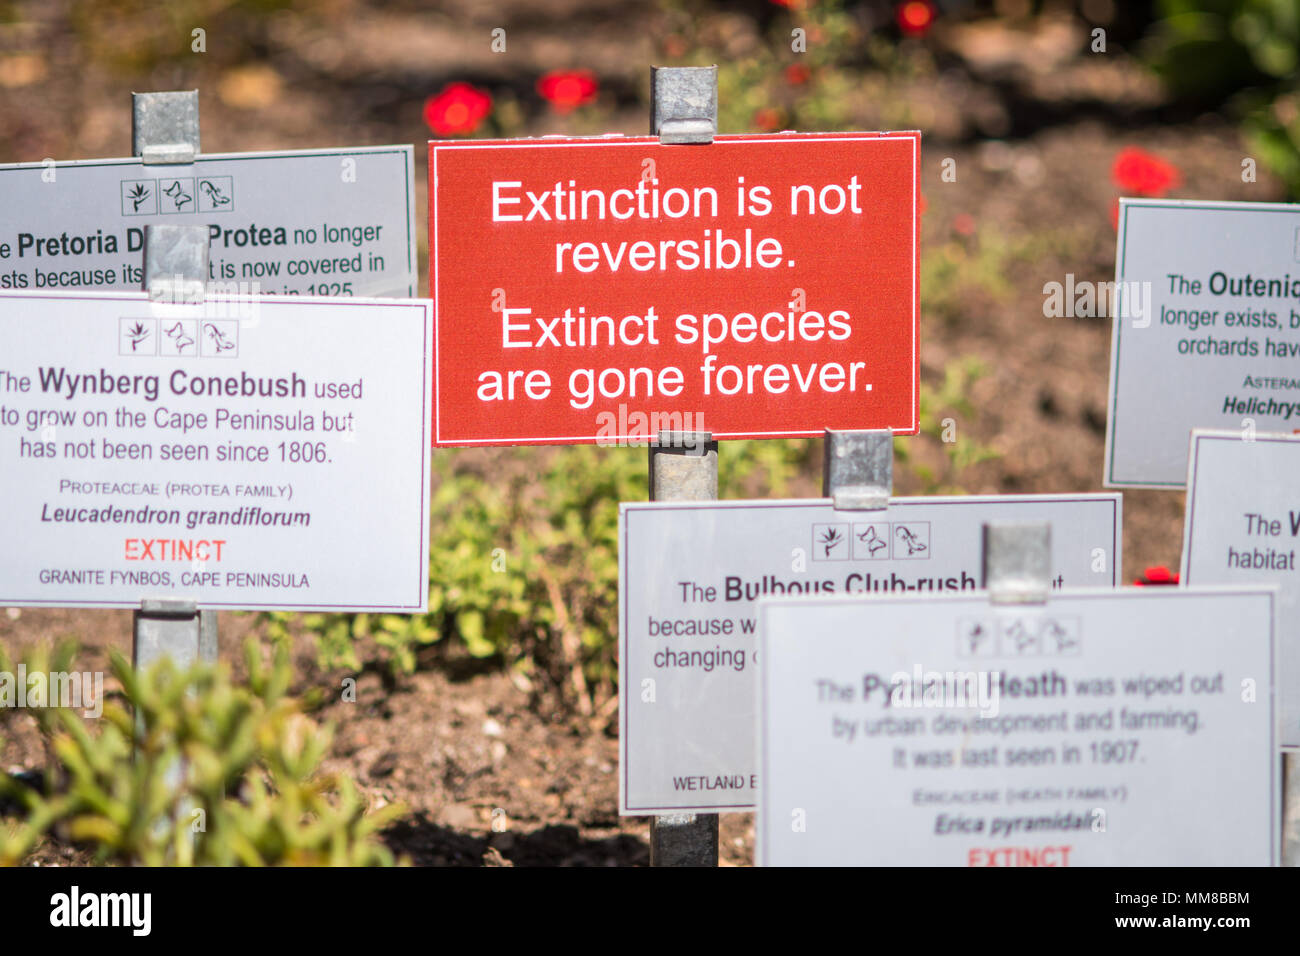 Signage informing about the local species along with a warning about extinction at the Kirstenbosch Botanical Gardens in Cape Town, South Africa Stock Photo